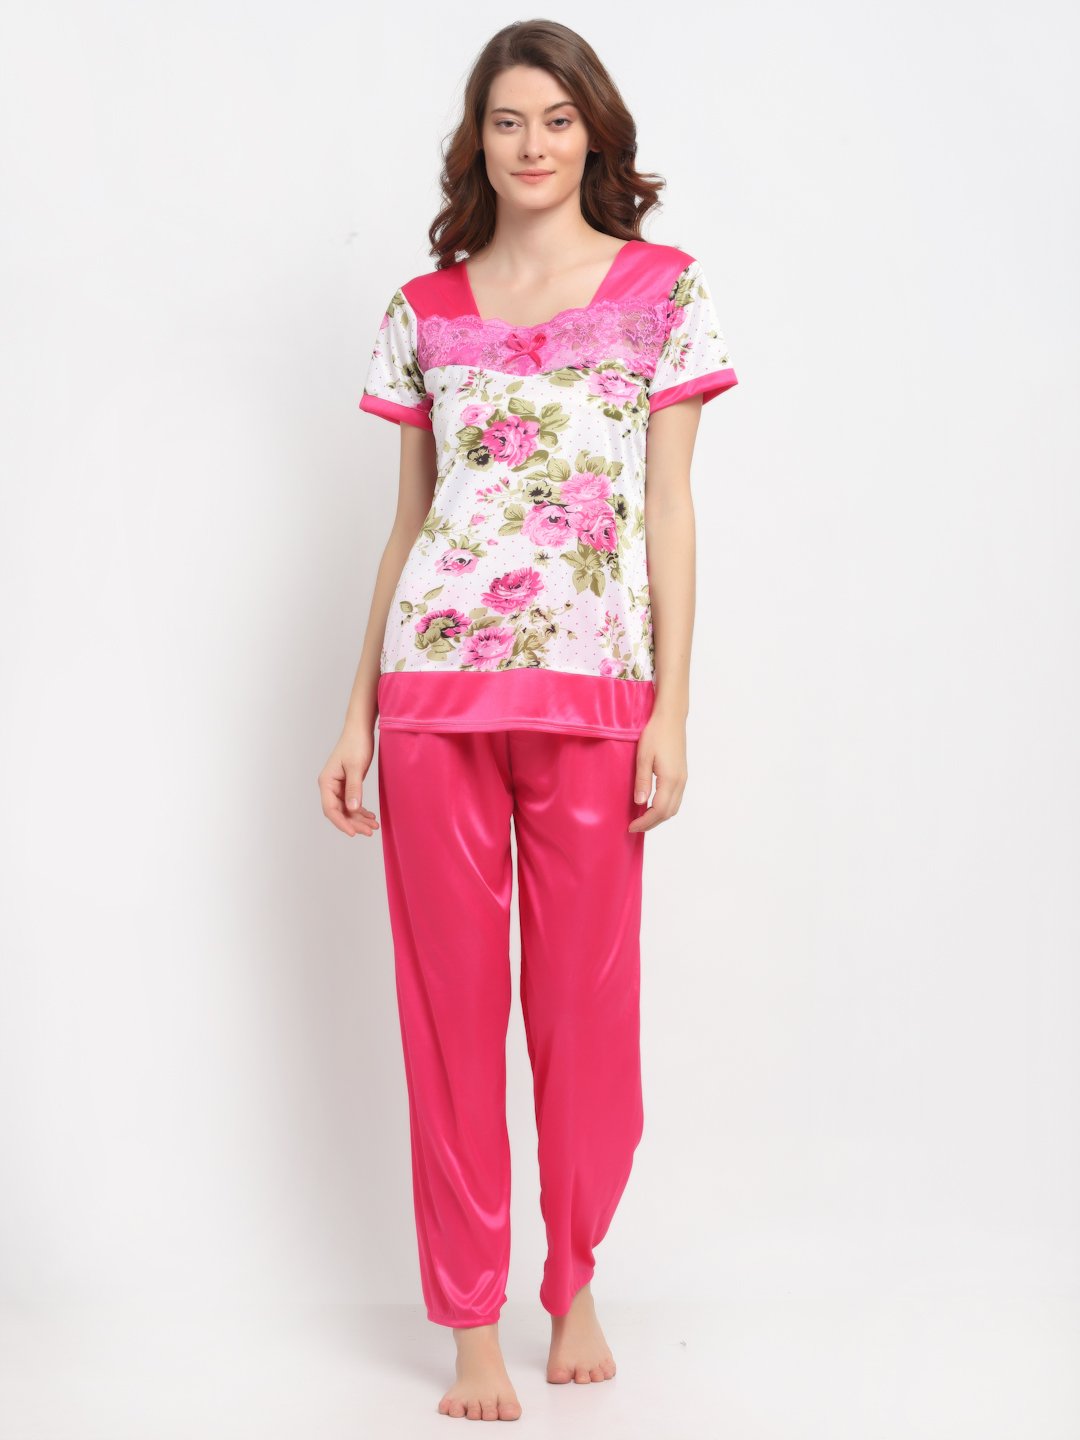 Cute Red top and Pajamas Night Wear Set for Girls – Stilento